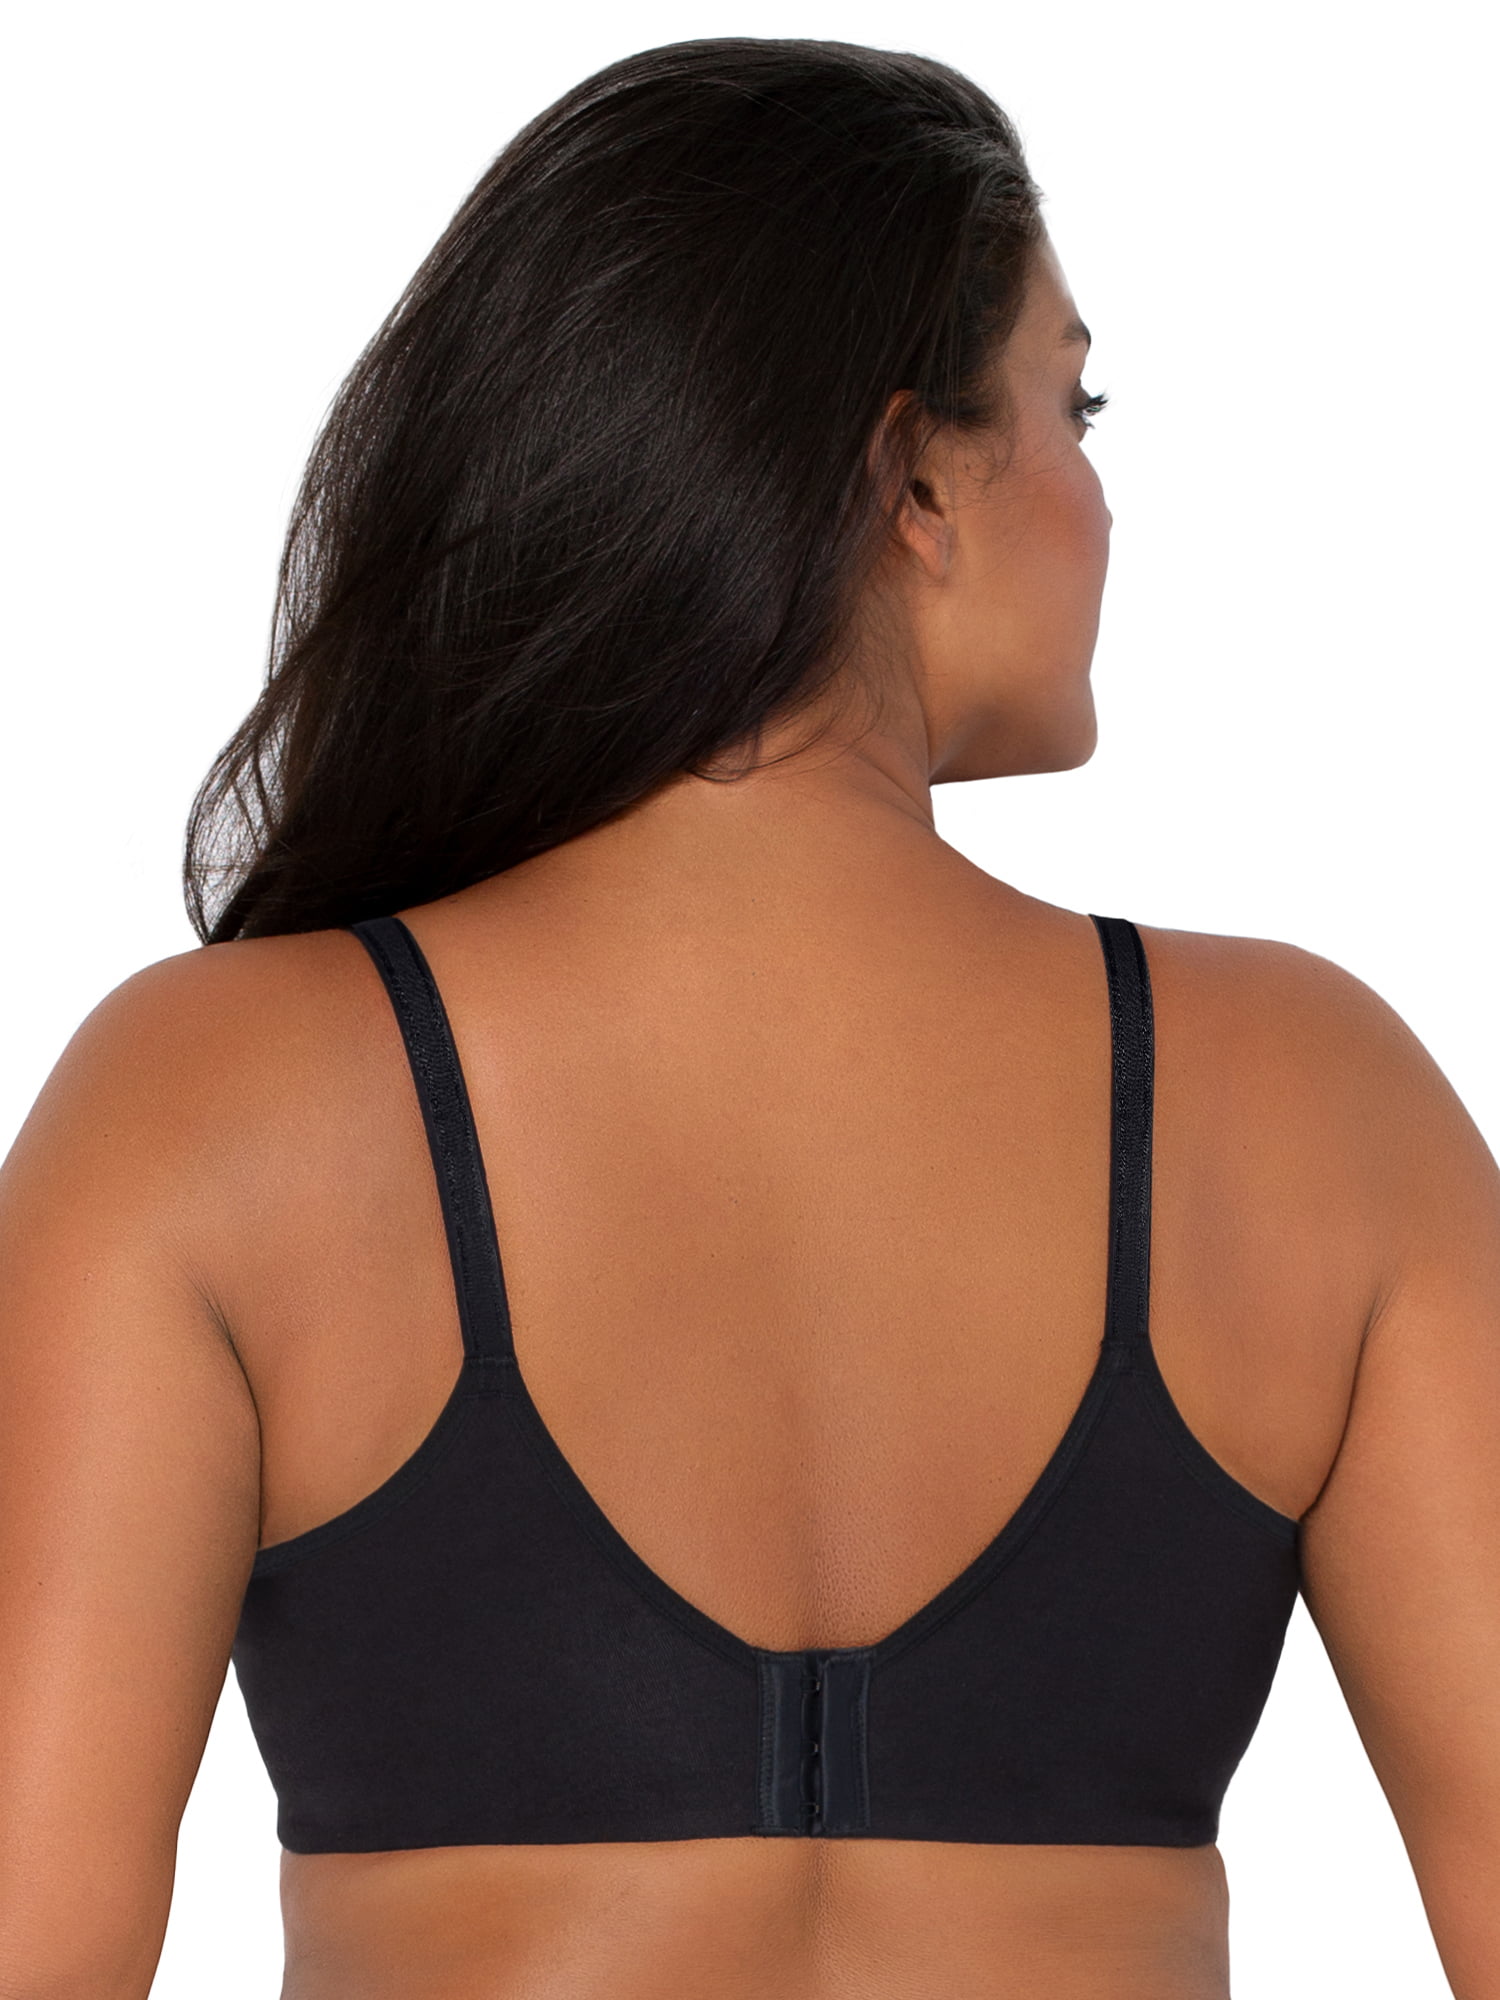 Ackermans - Save 30.00 on all 2-pack Perfect Fit Bras, from only